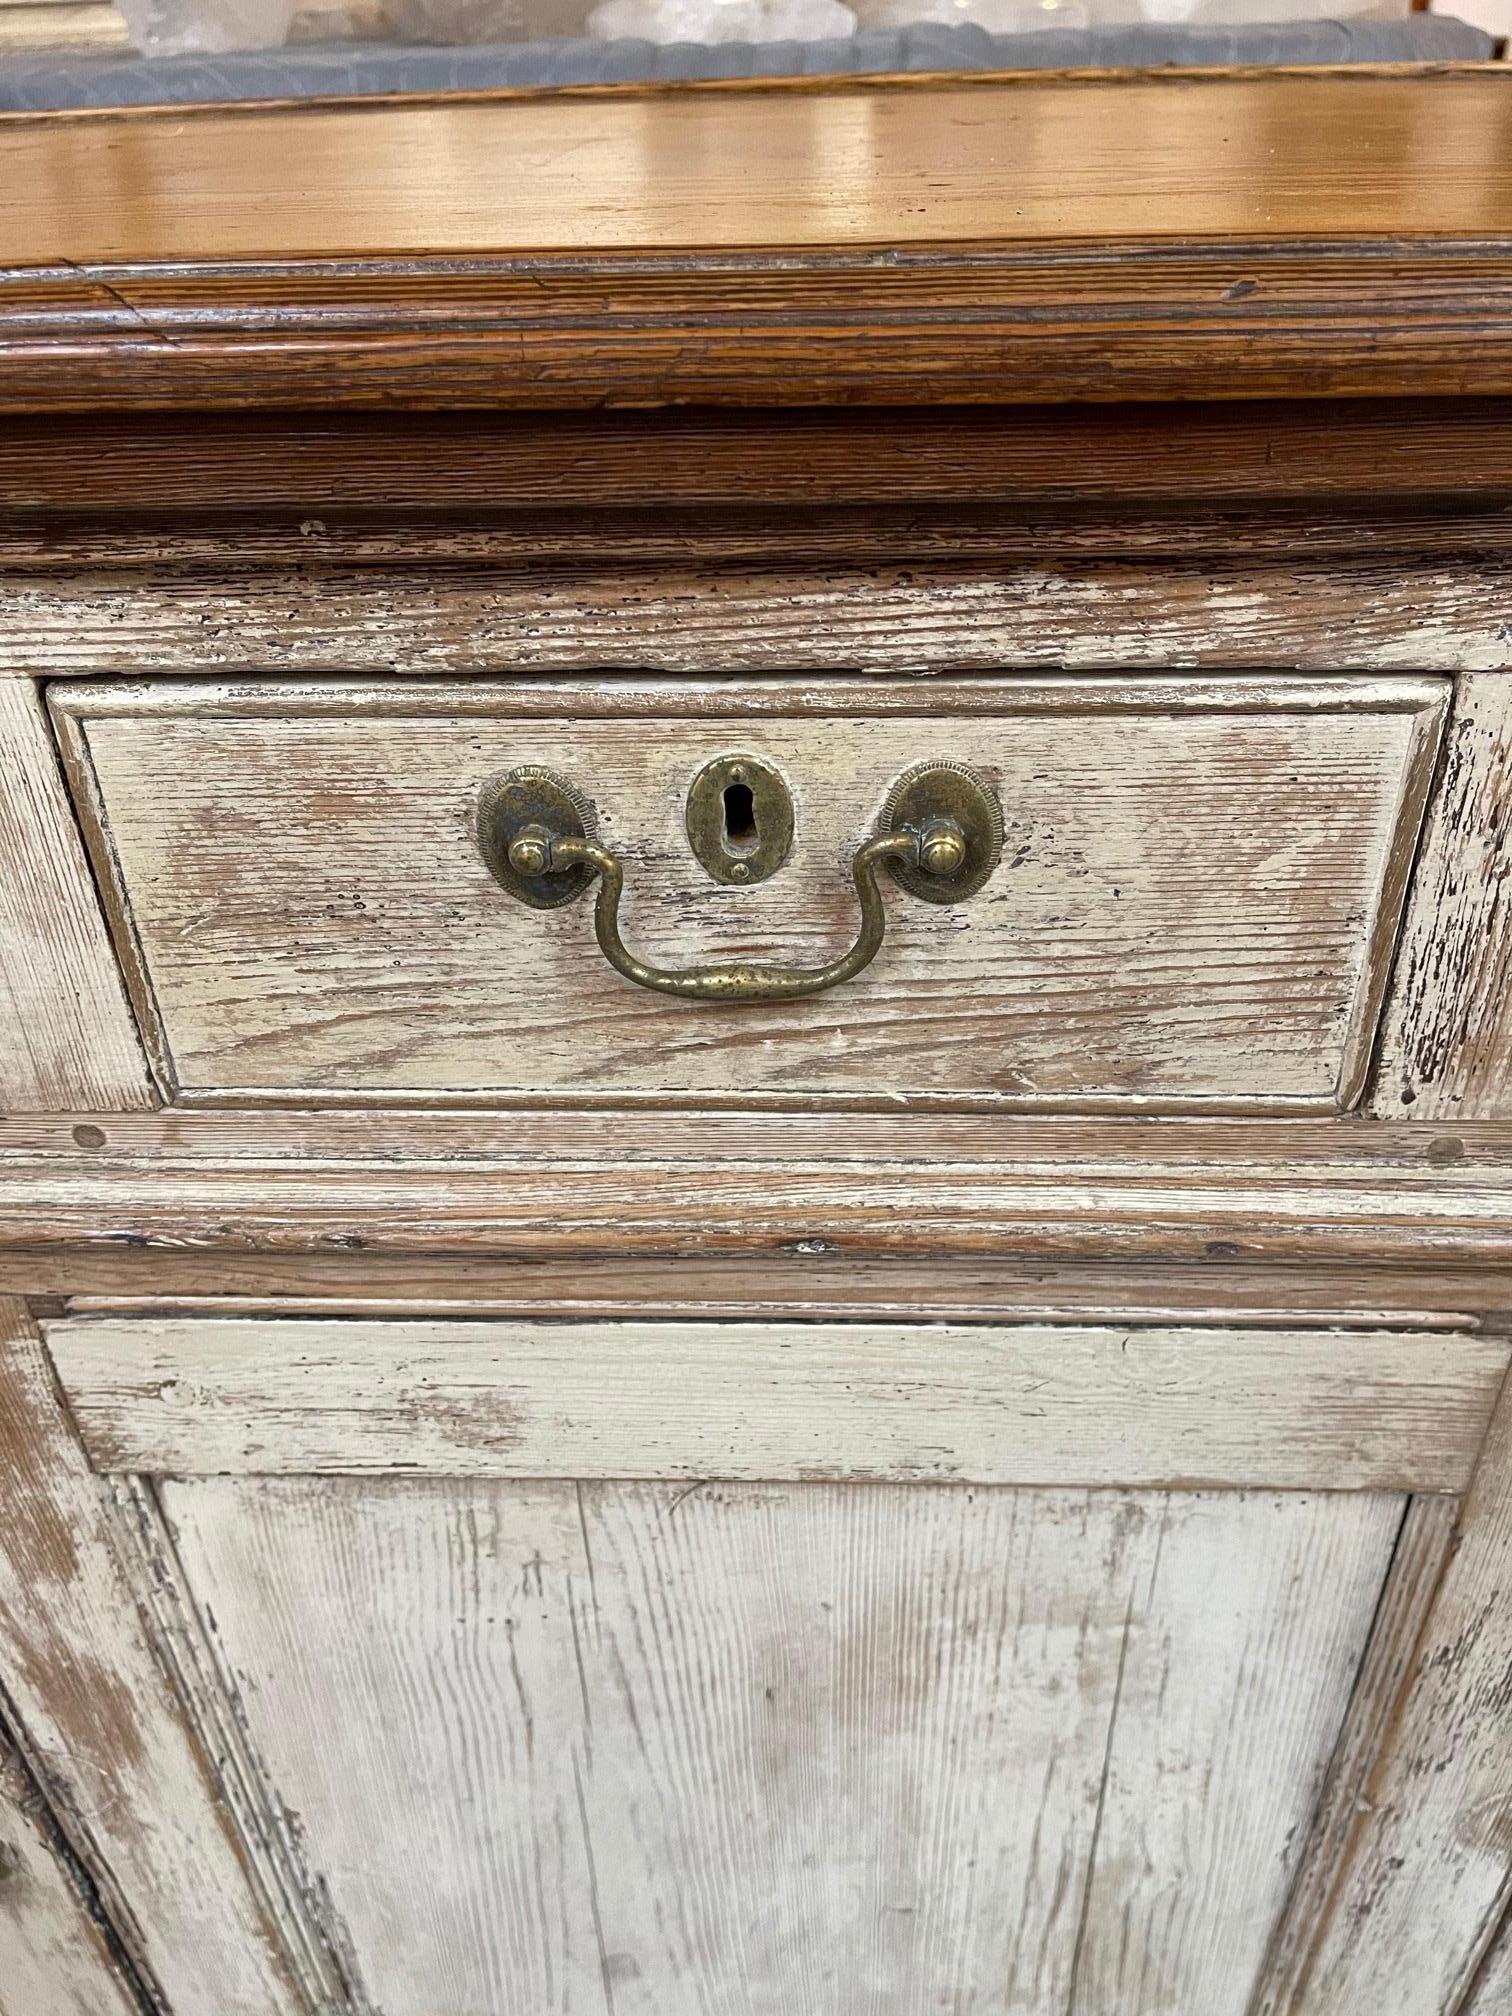 Lovely early 19th century country English painted oak buffet. Beautiful patina on this piece and tons of storage as well. Great for the farm house look!